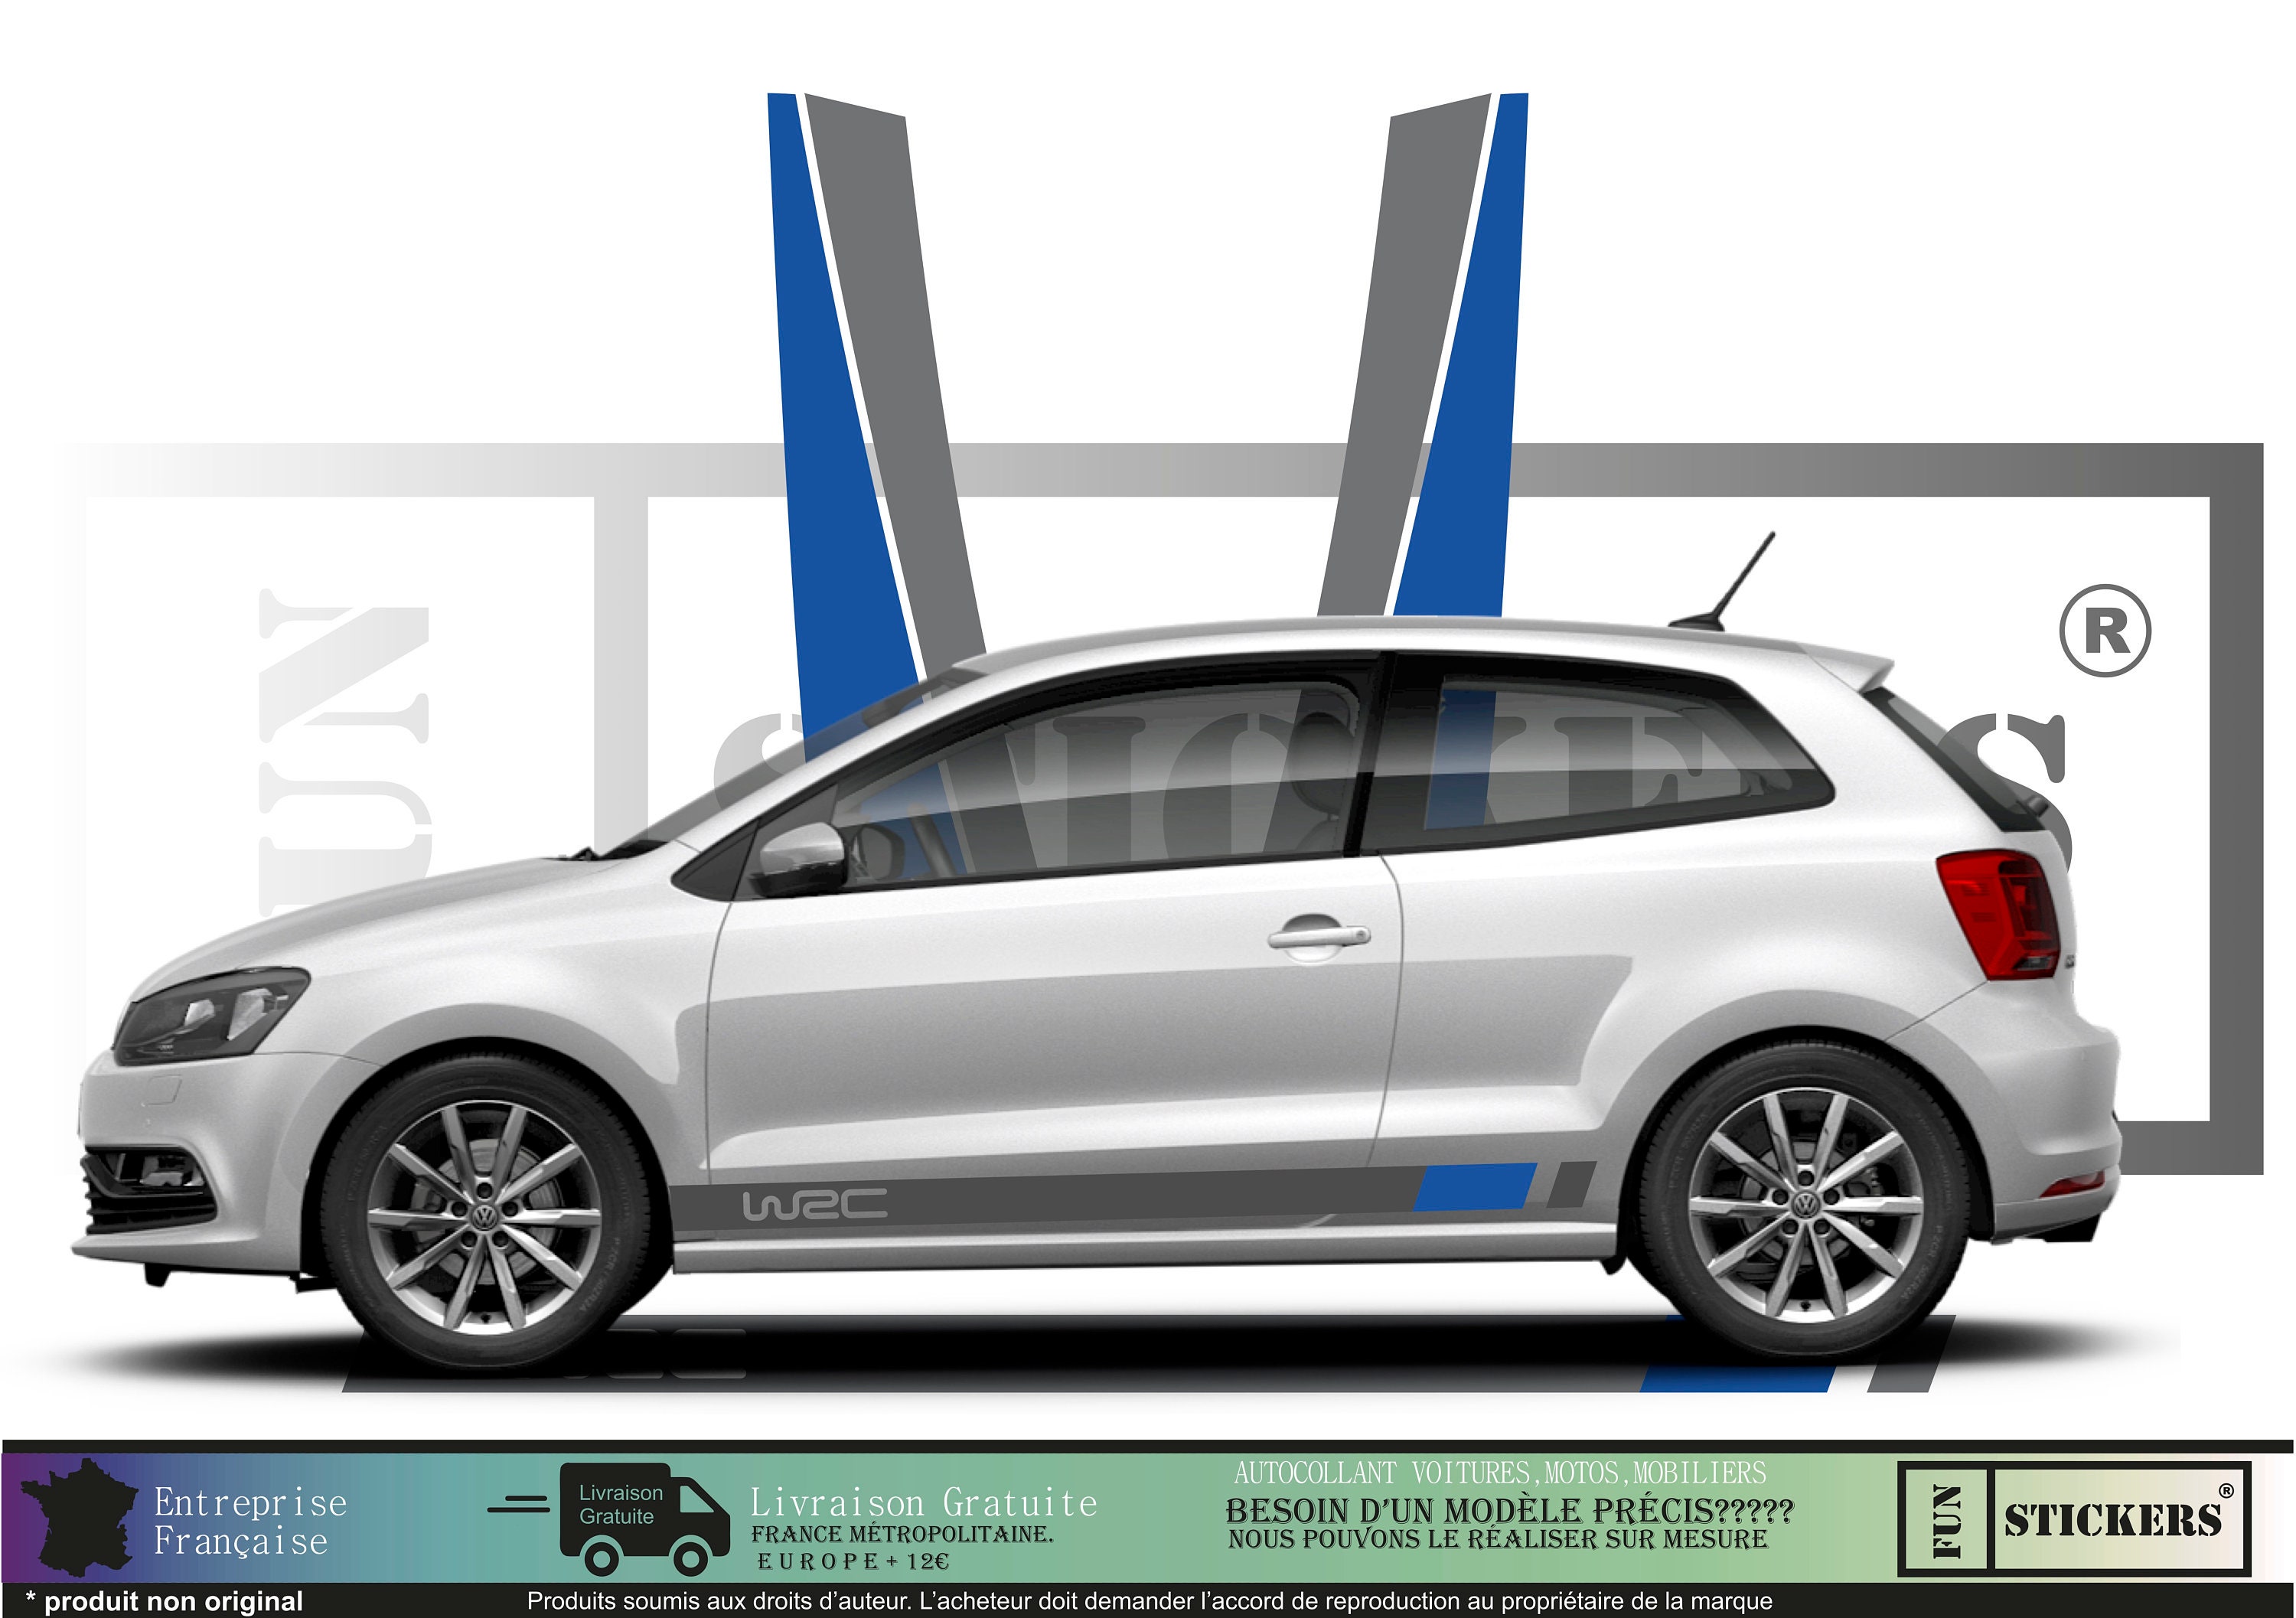 Buy Vw Polo Stickers Online In India -  India